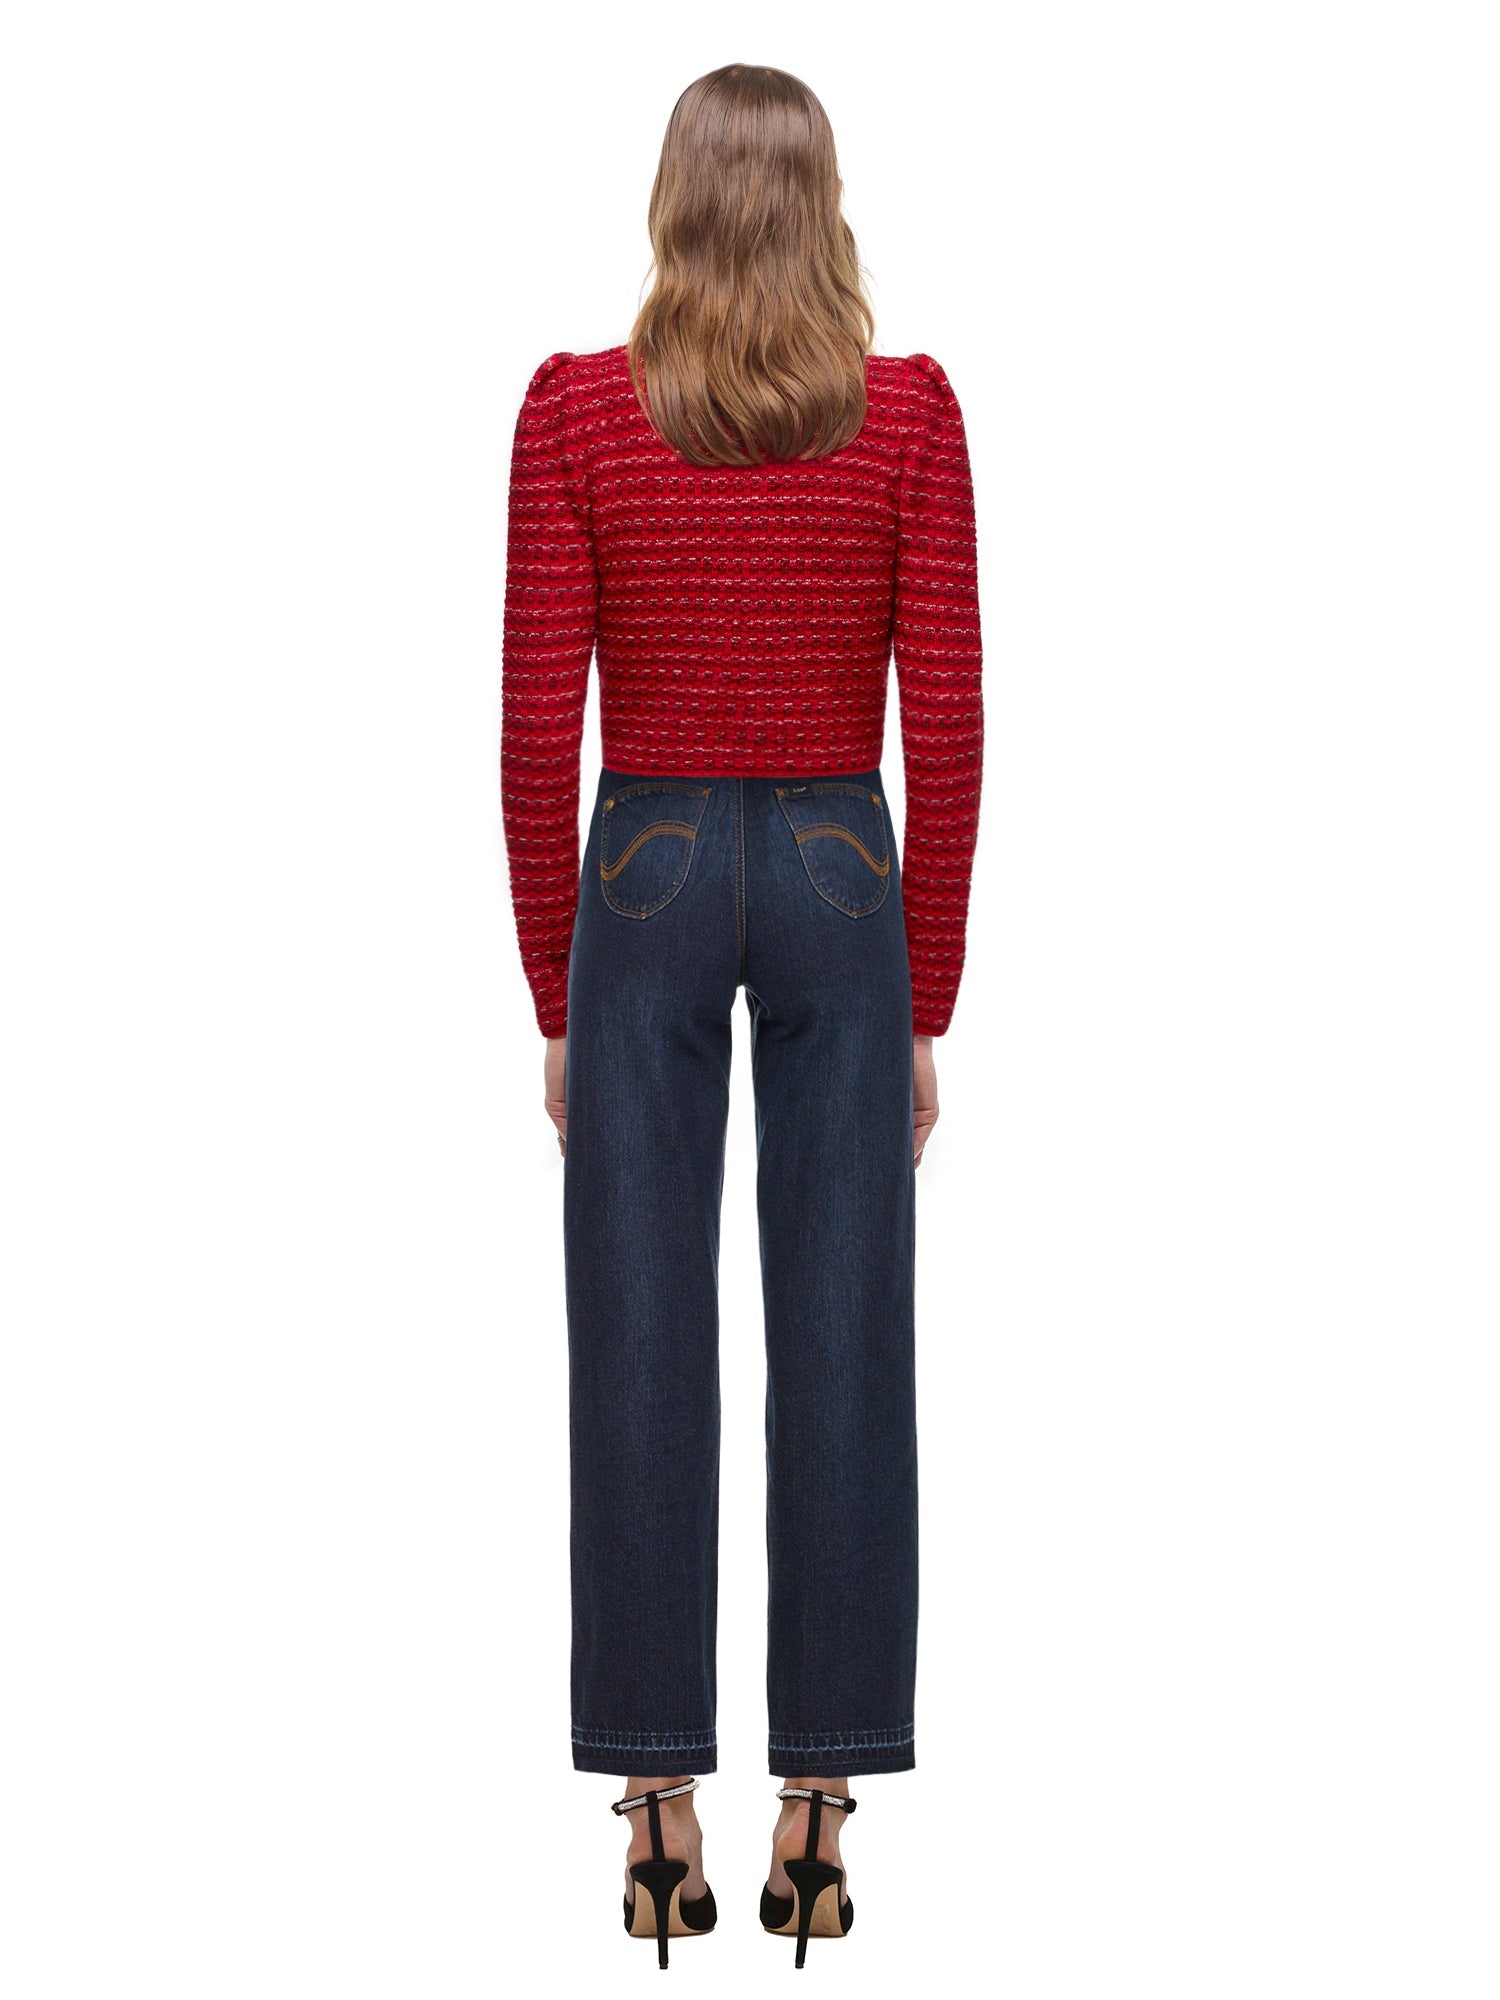 A woman wearing the Red Melange Cropped Cardigan